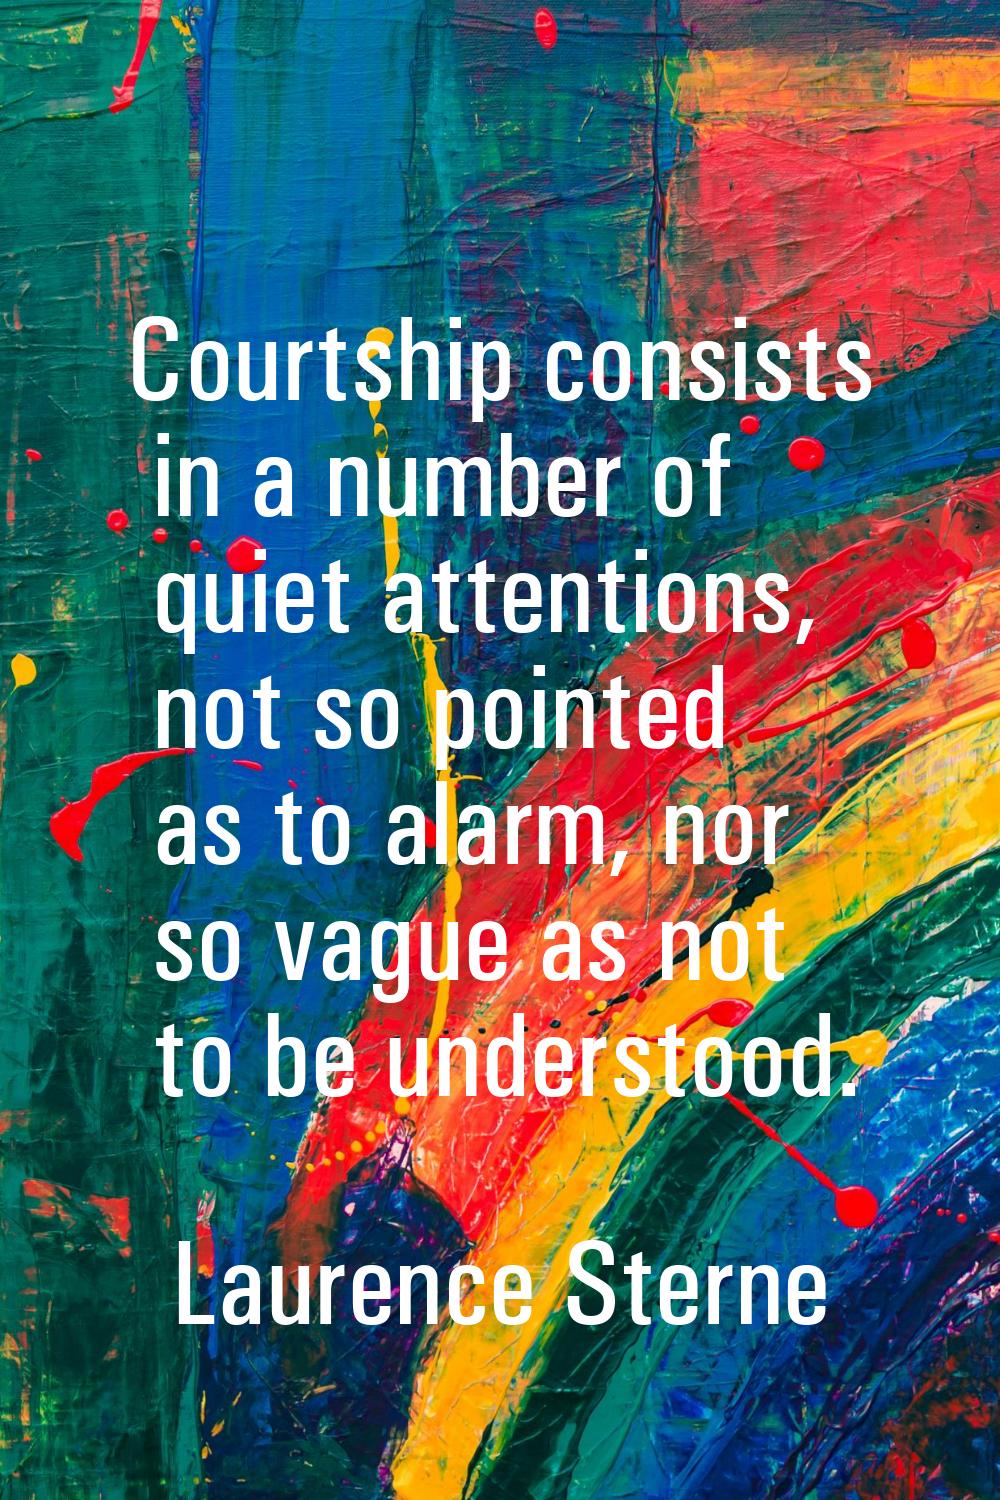 Courtship consists in a number of quiet attentions, not so pointed as to alarm, nor so vague as not